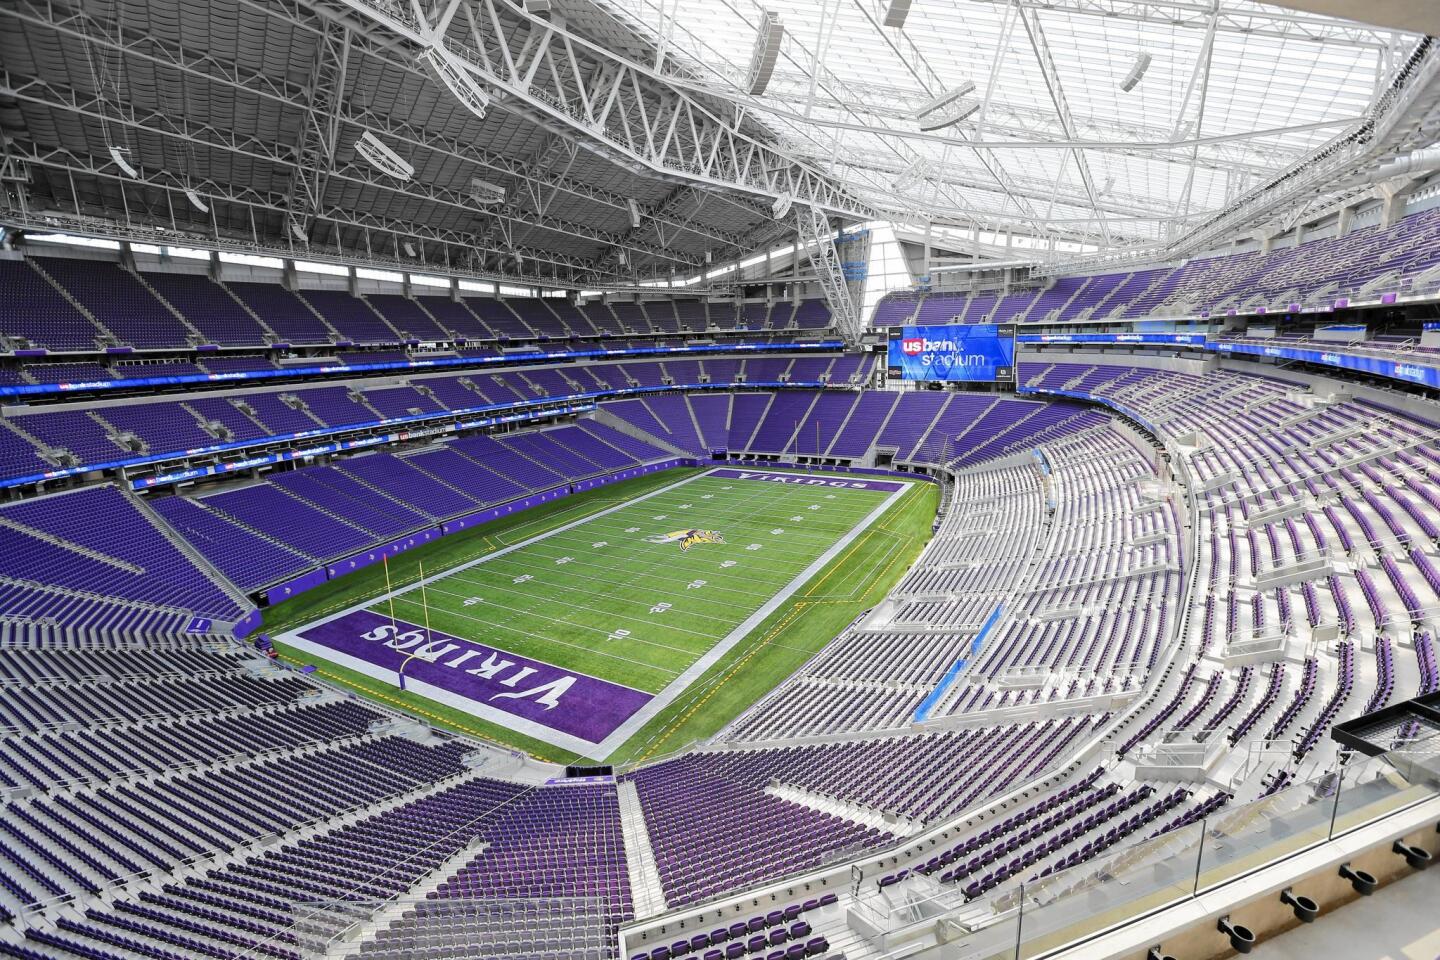 All eyes — or tens of millions, at least — will be on U.S. Bank Stadium in Minneapolis on Feb. 4 for Super Bowl LII.